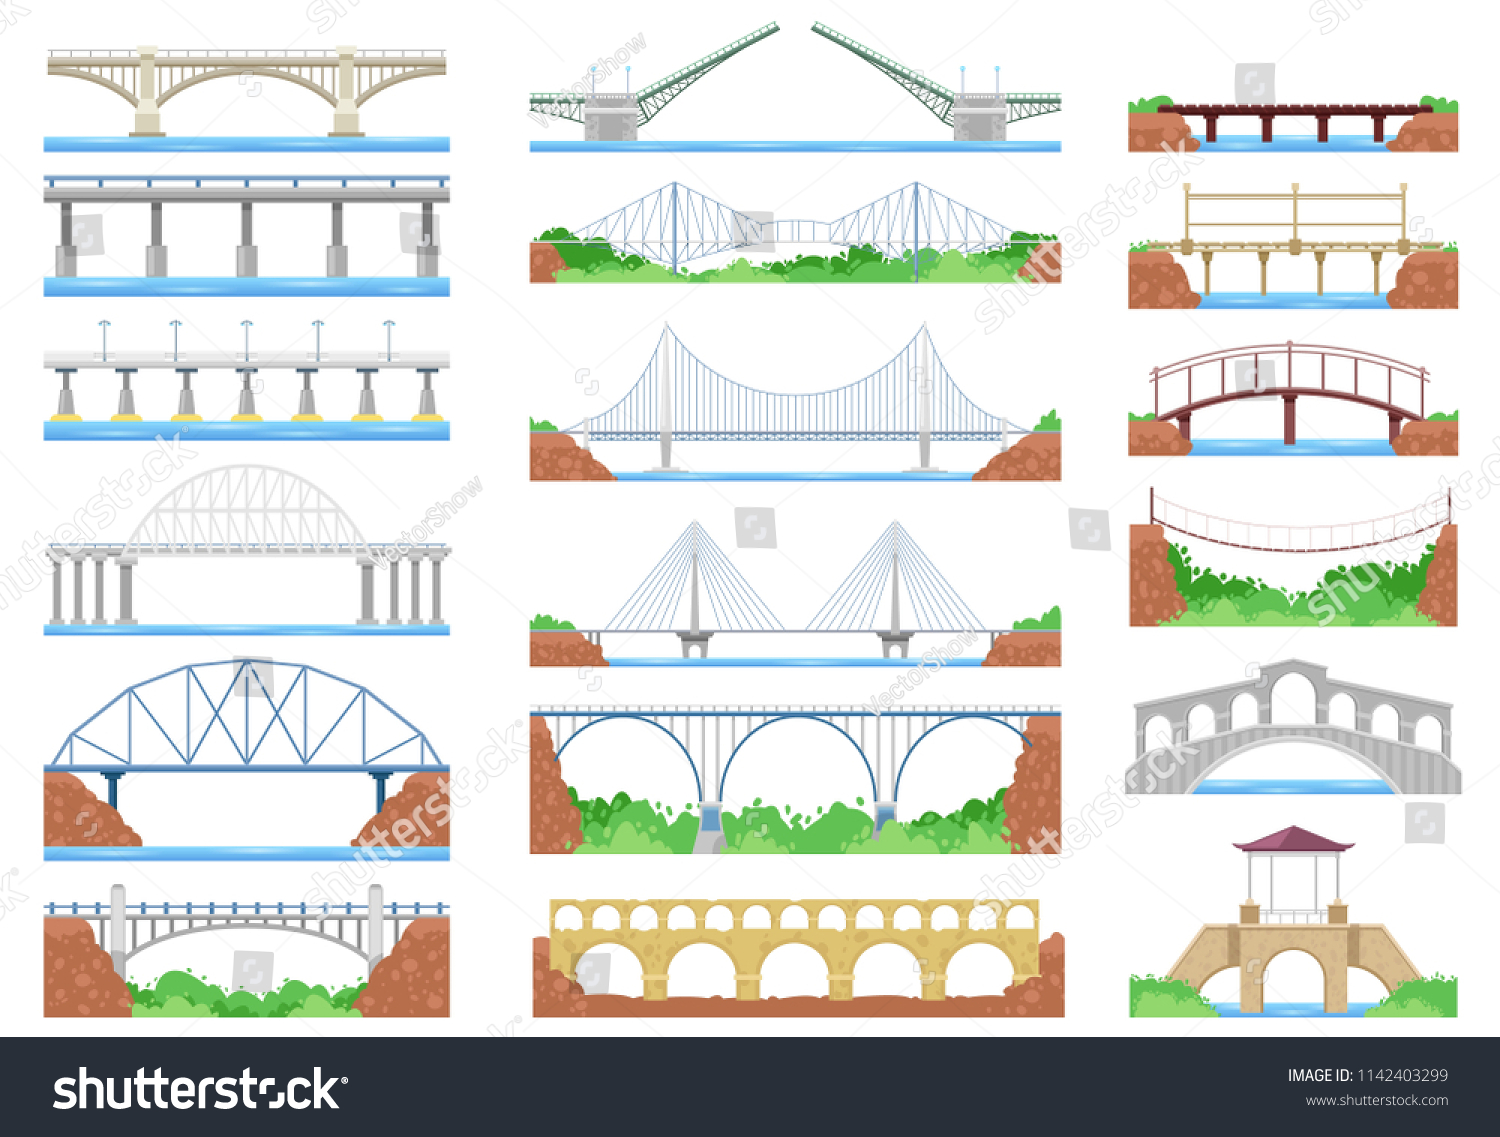 SVG of Bridge vector urban crossover architecture and bridge-construction for transportation illustration bridged set of river bridge-building with carriageway isolated on white background svg